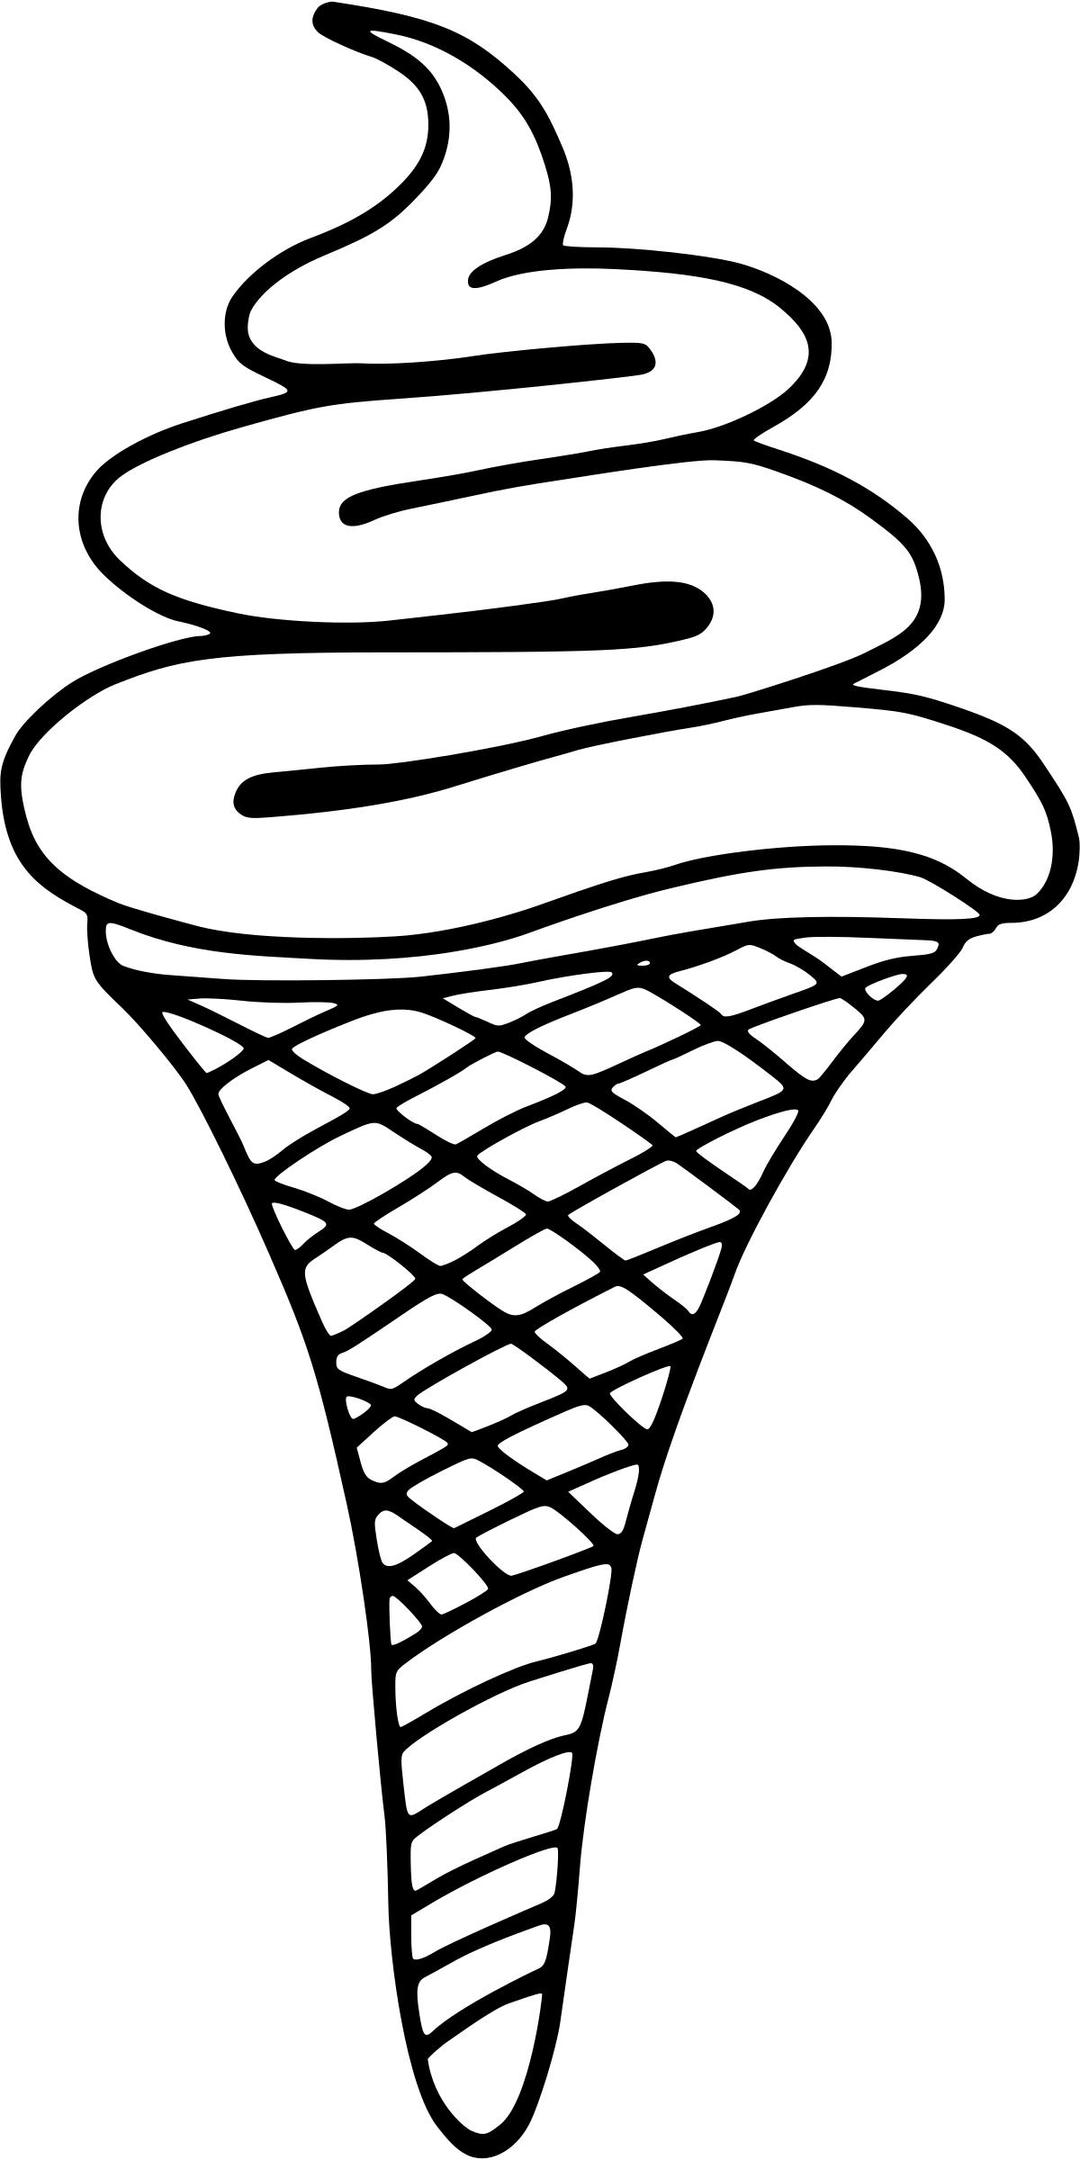 glace-italienne-bw png transparent